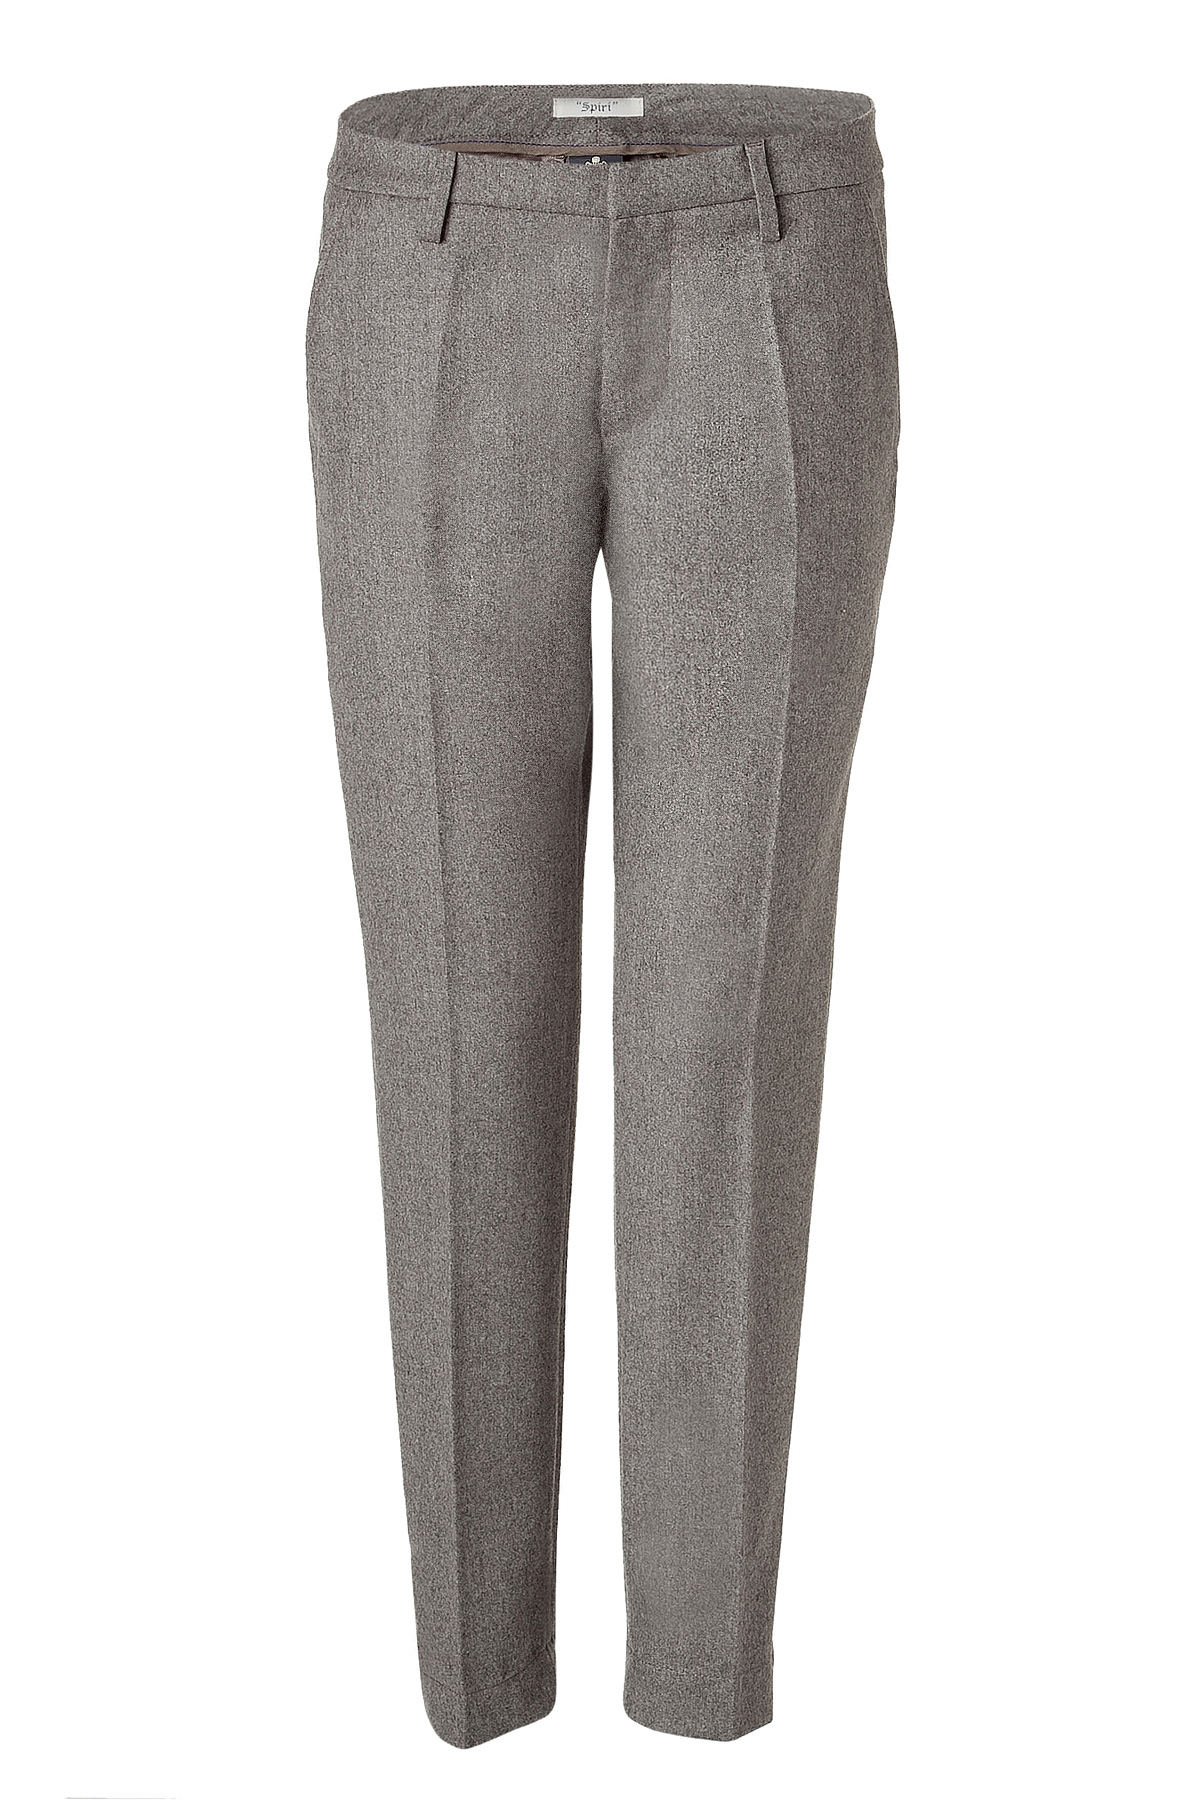 Lyst - Dondup Grey Flannel Pants in Gray for Men